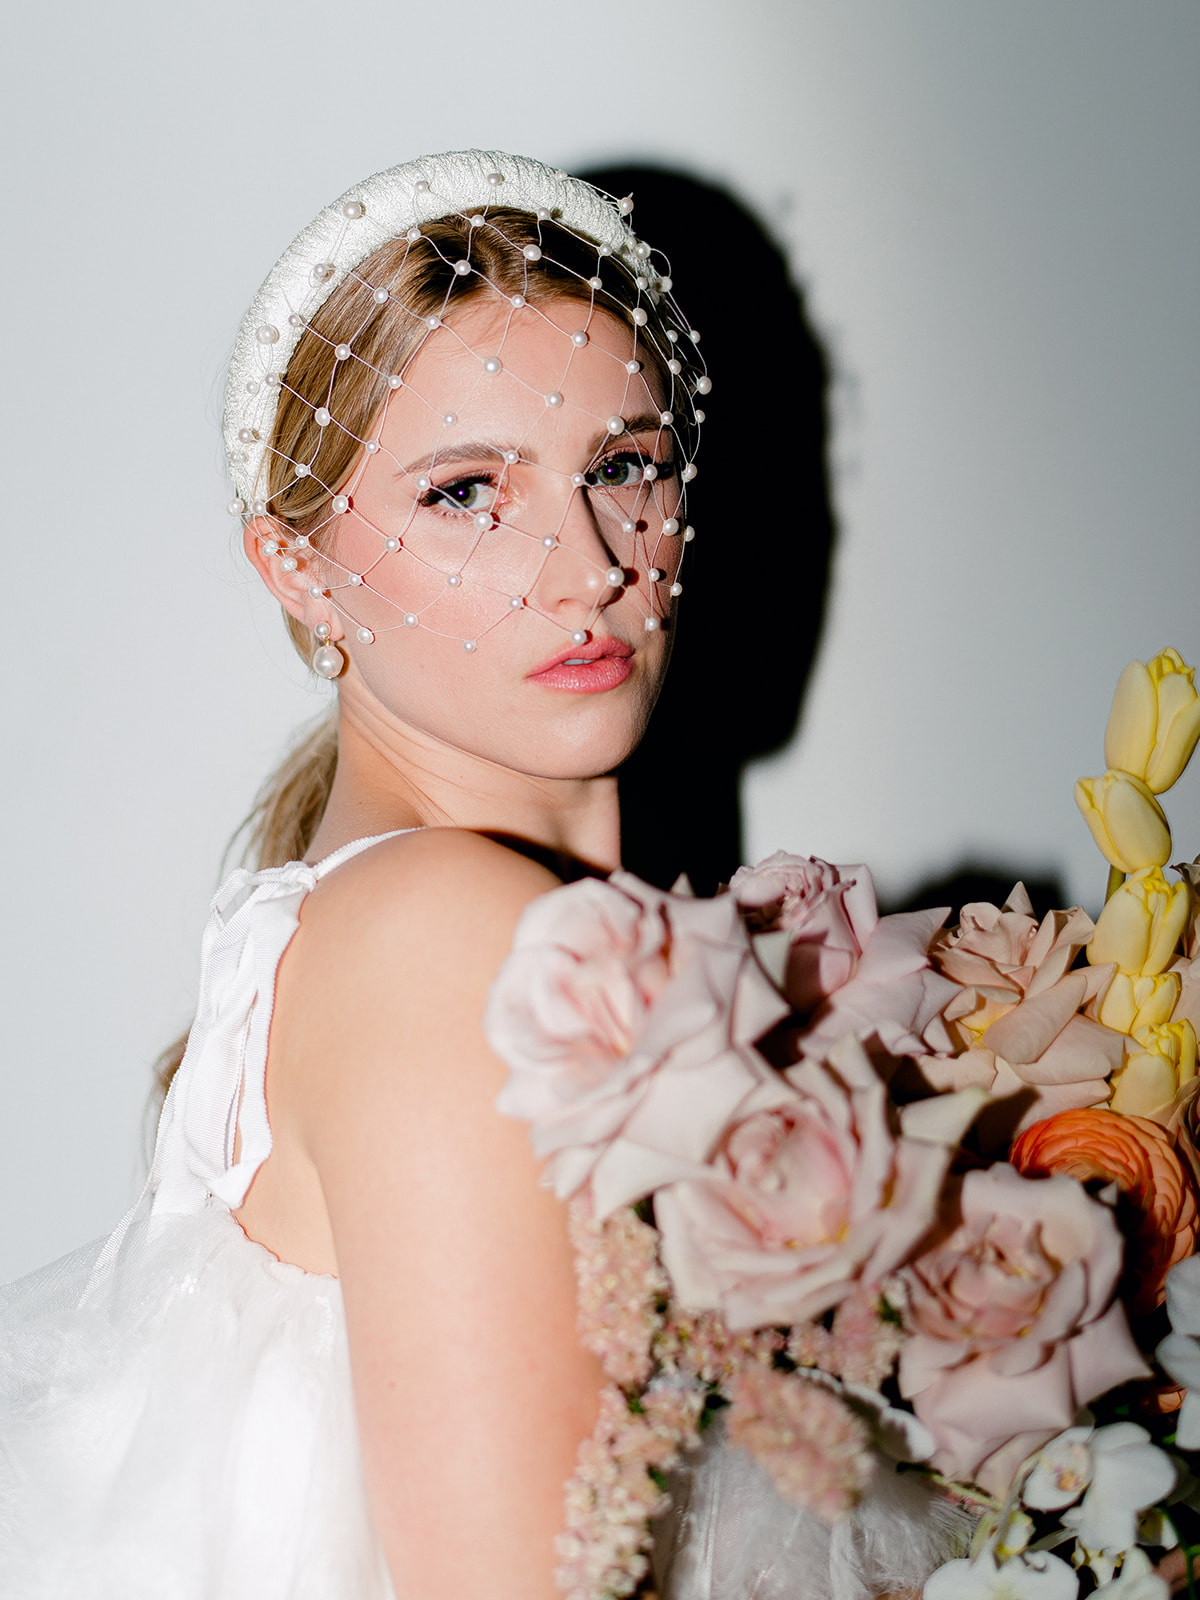 Dynamic flash photography beautifully illuminating bright florals in captivating bridal portraits, a mix of modern and vintage aesthetic, portrait featuring a birdcage veil and white headband worn by a bride holding her bouquet in a feather wedding gown, low pony-tail bridal hairstyle